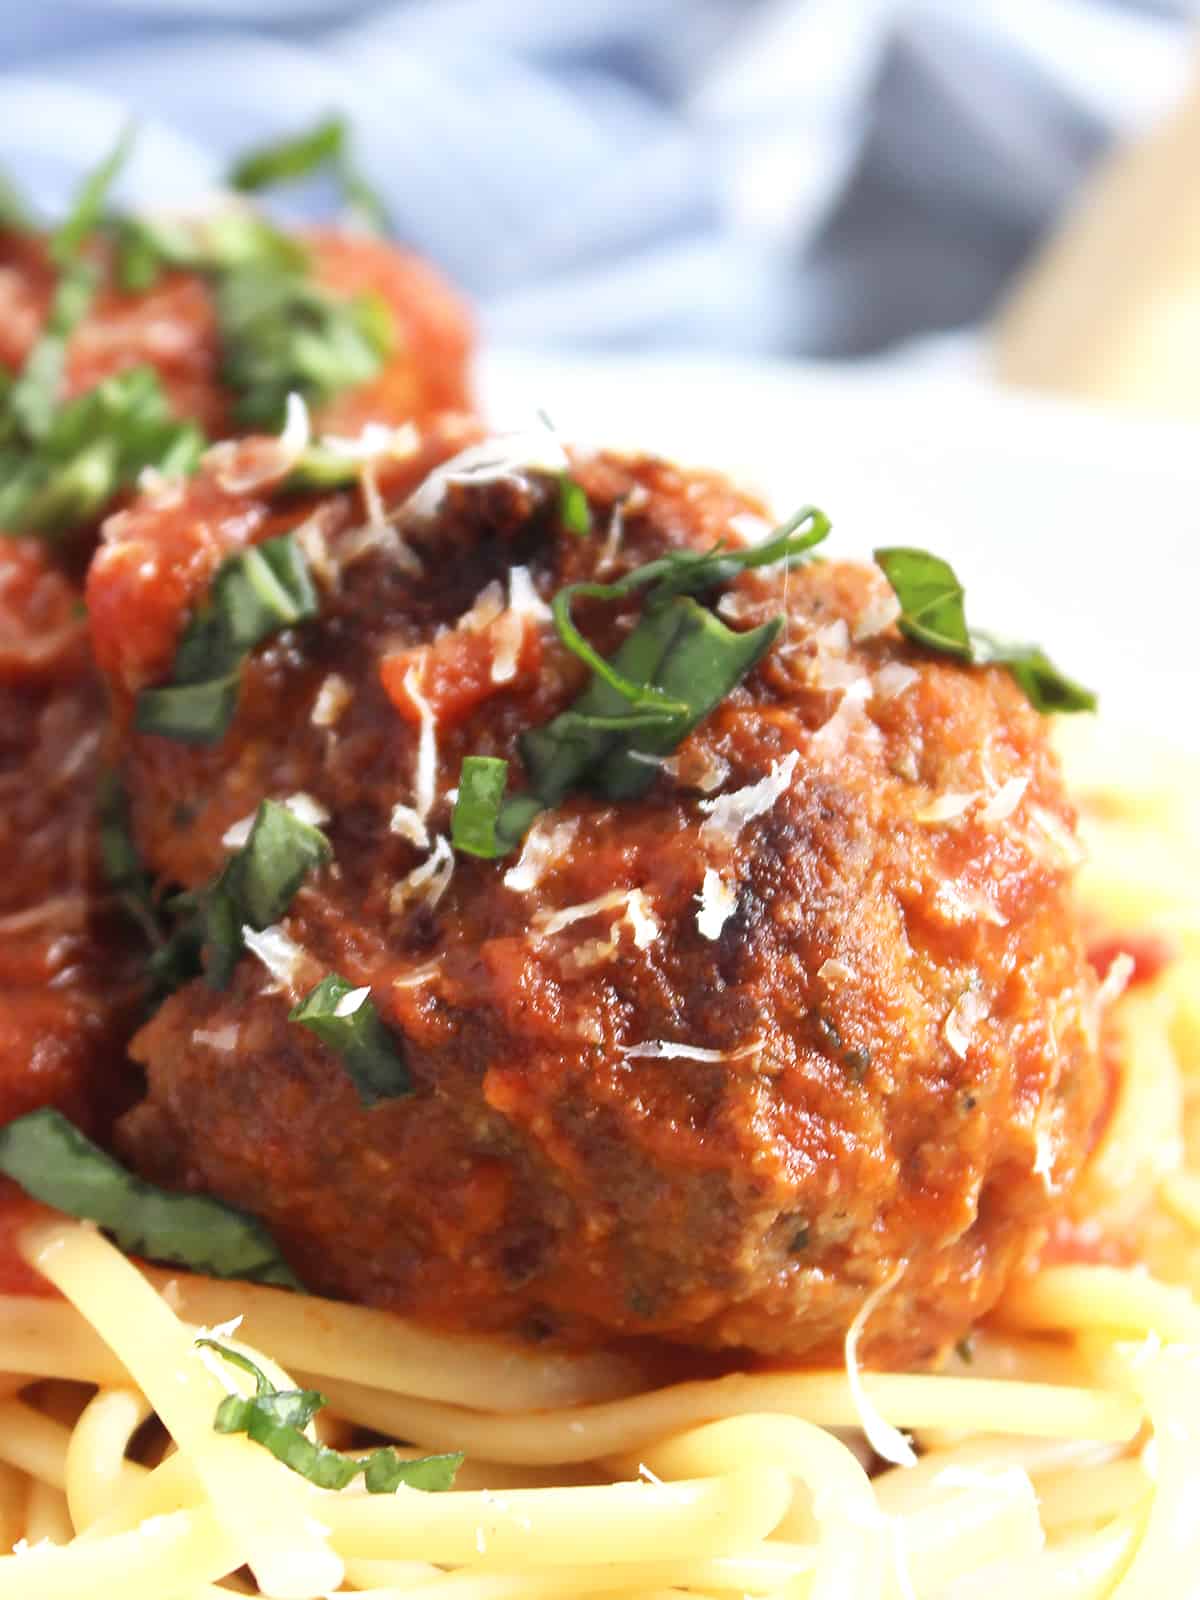 Close up of a bison meatball with grated parmesan and herbs